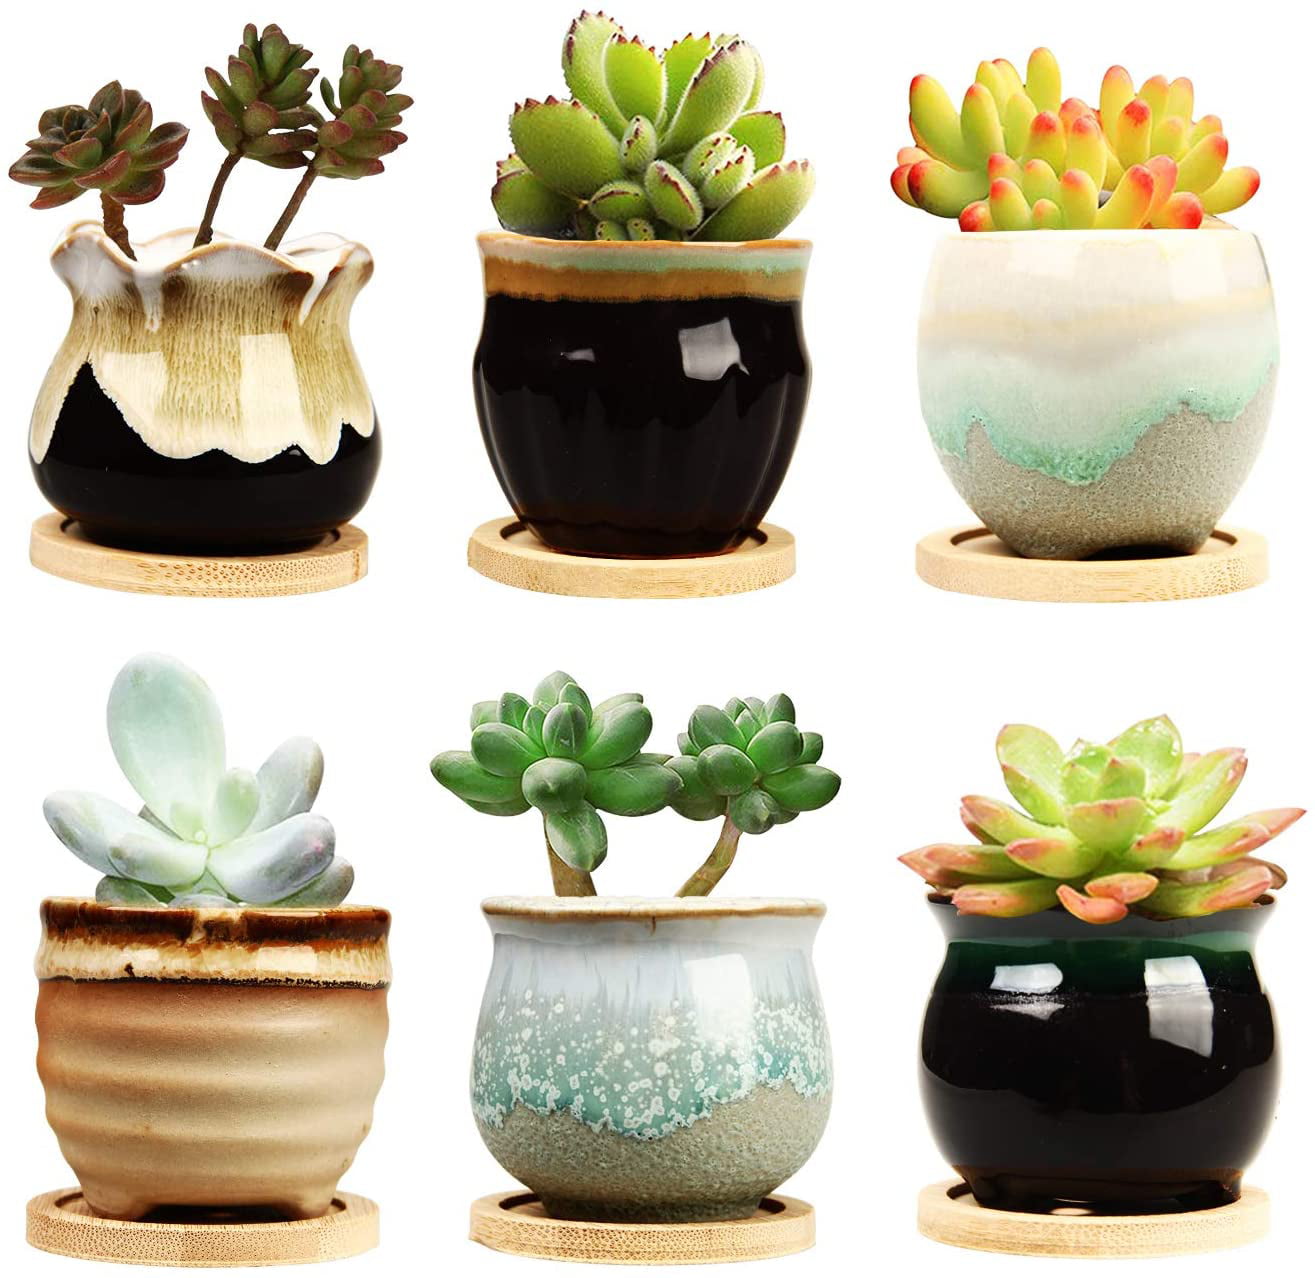 Small Succulent Planter with Drainage T4U Ceramic Succulent Pots 2.5 Inch Round Set of 6 with Trays Marbling Porcelain Herbs Cactus Container for Home and Office Decor 